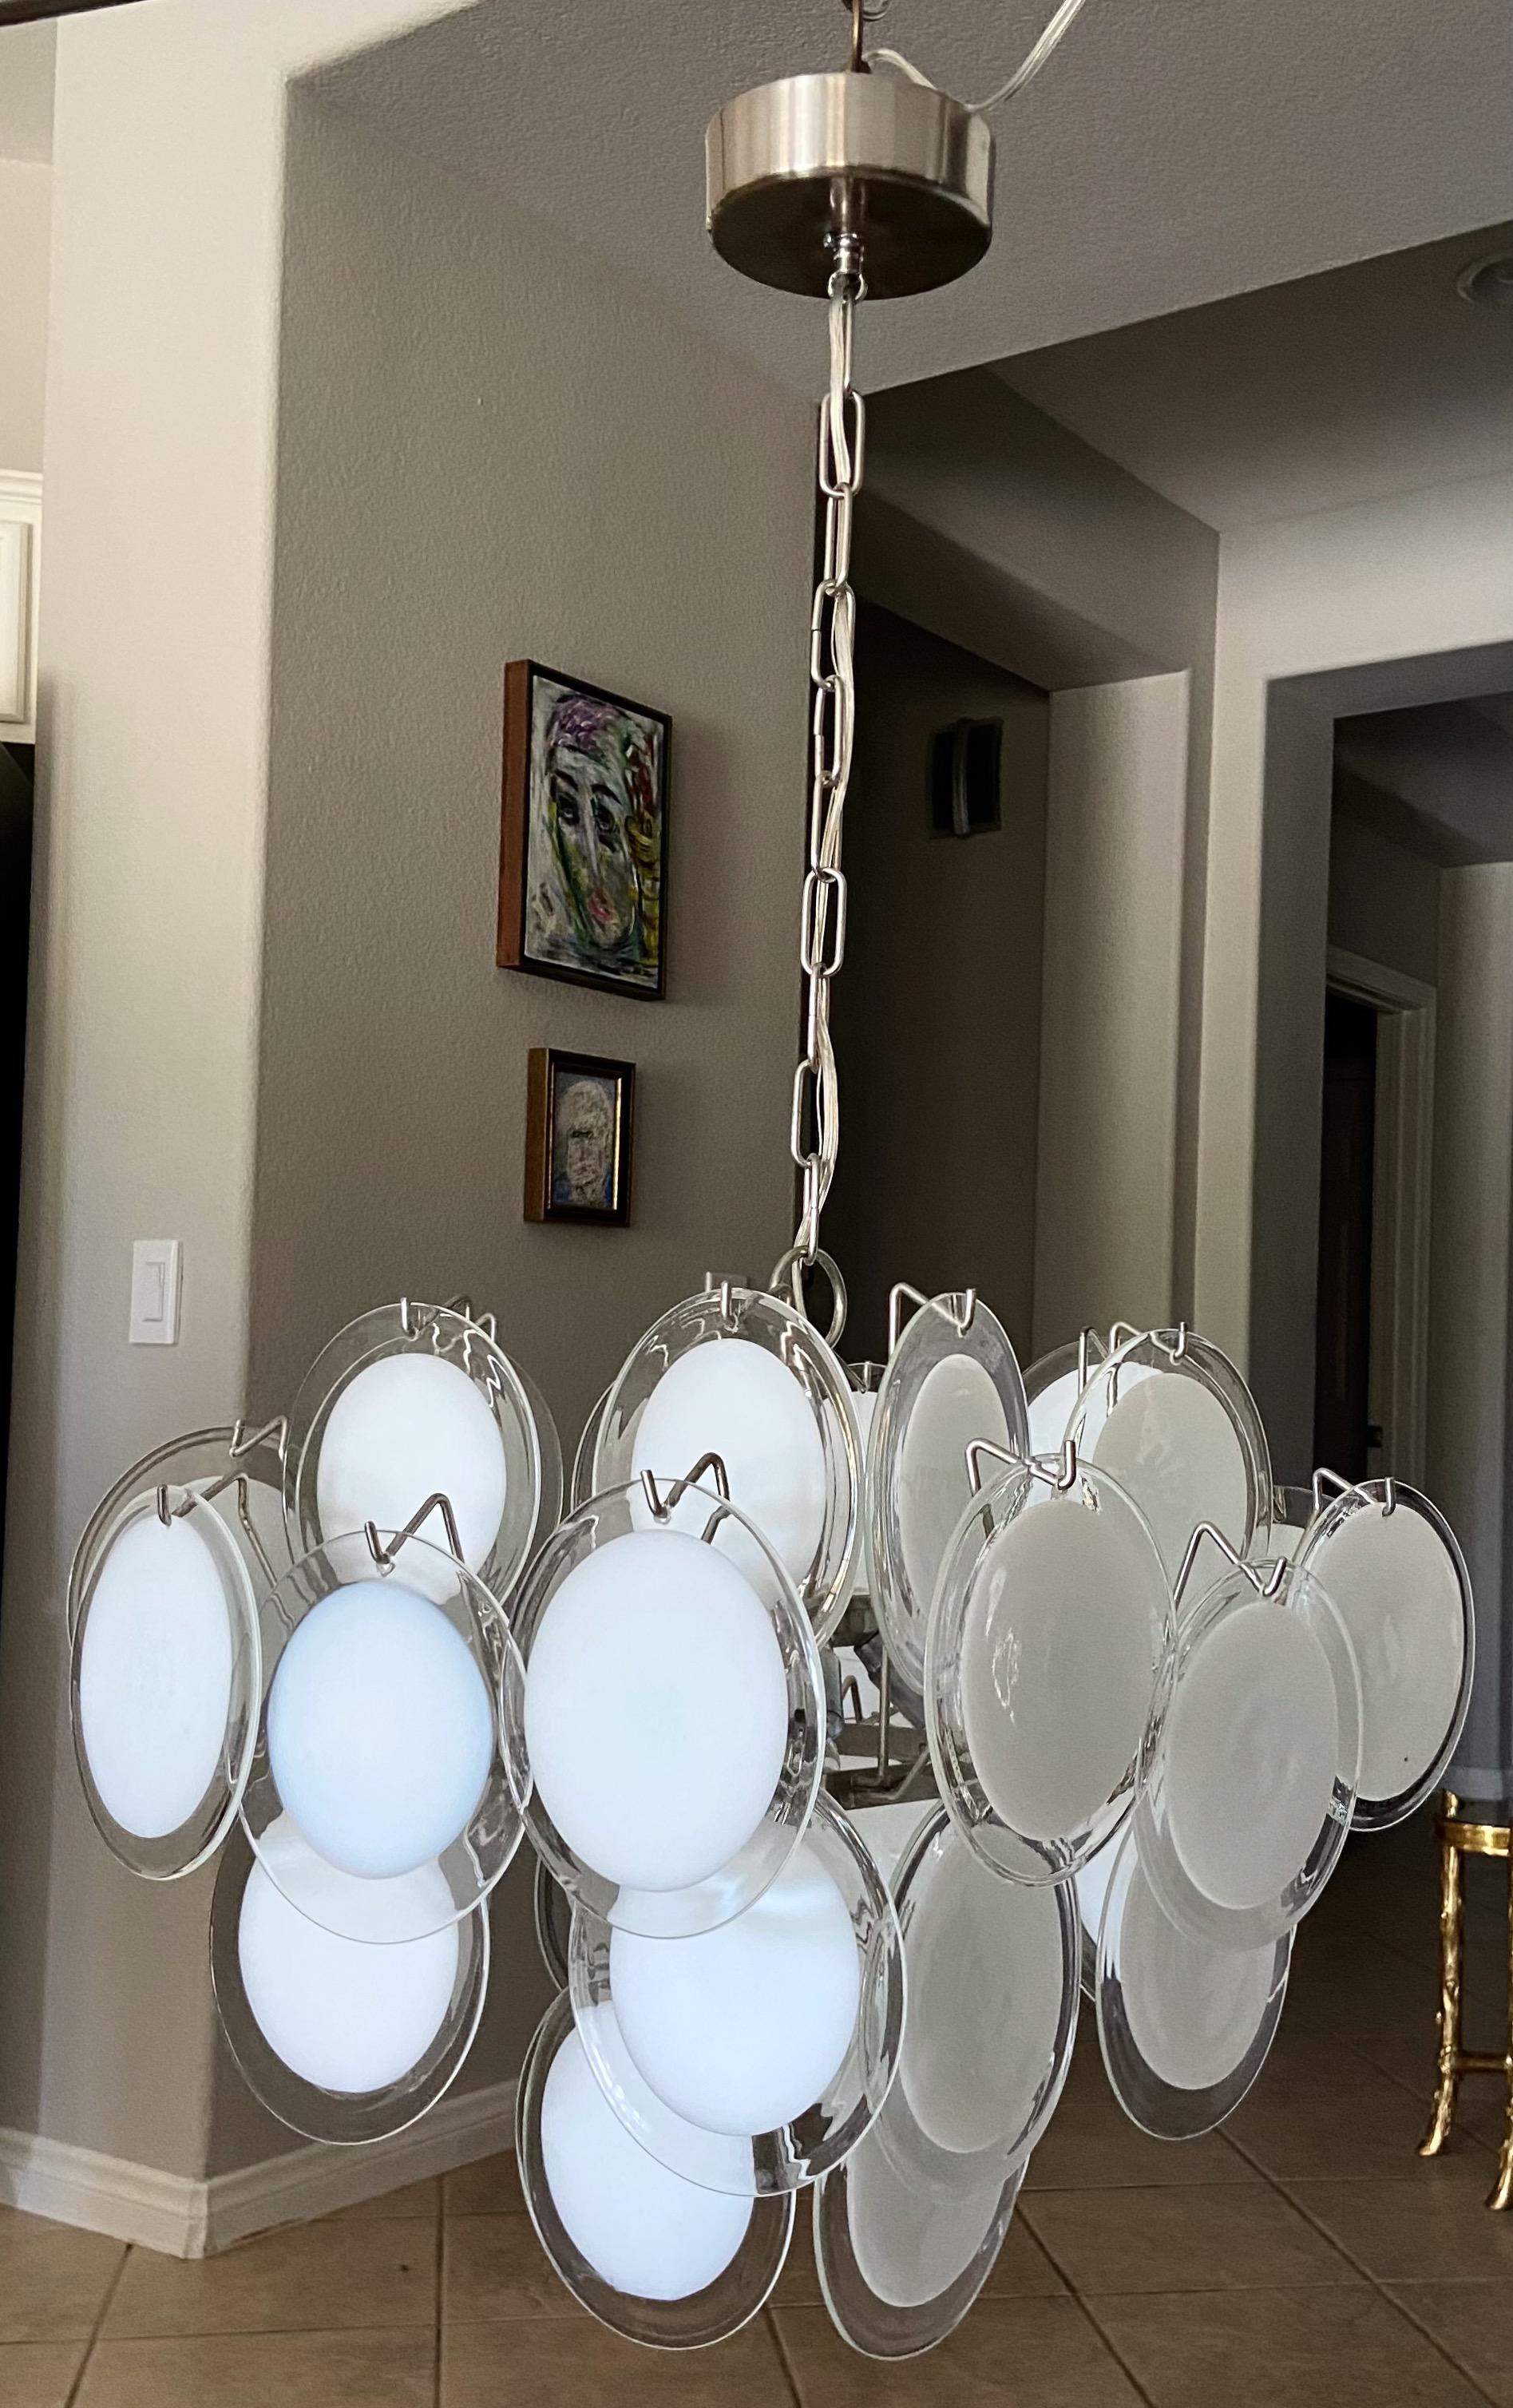 Clear and white disc Murano Italian glass 4 light chandelier. Steel frame. Uses 4 candelabra size bulbs, newly wired. The diagonal length is 24